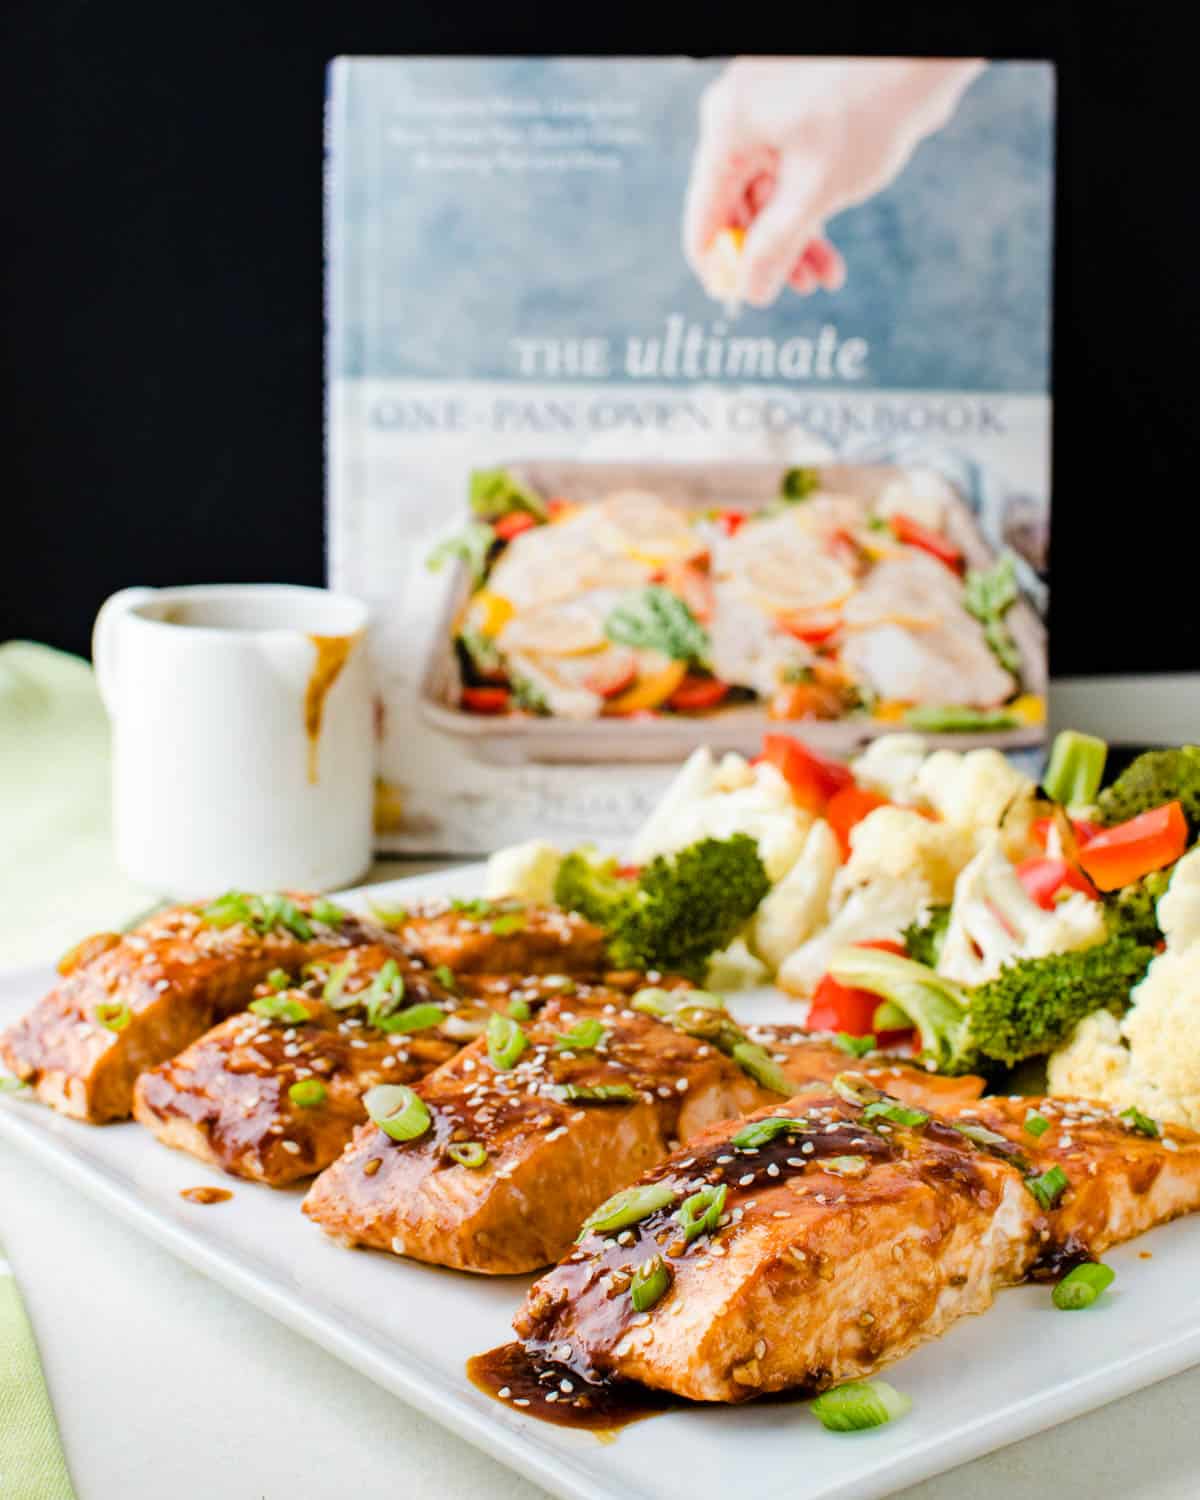 The Asian glazed salmon on a platter with a cookbook behind it.